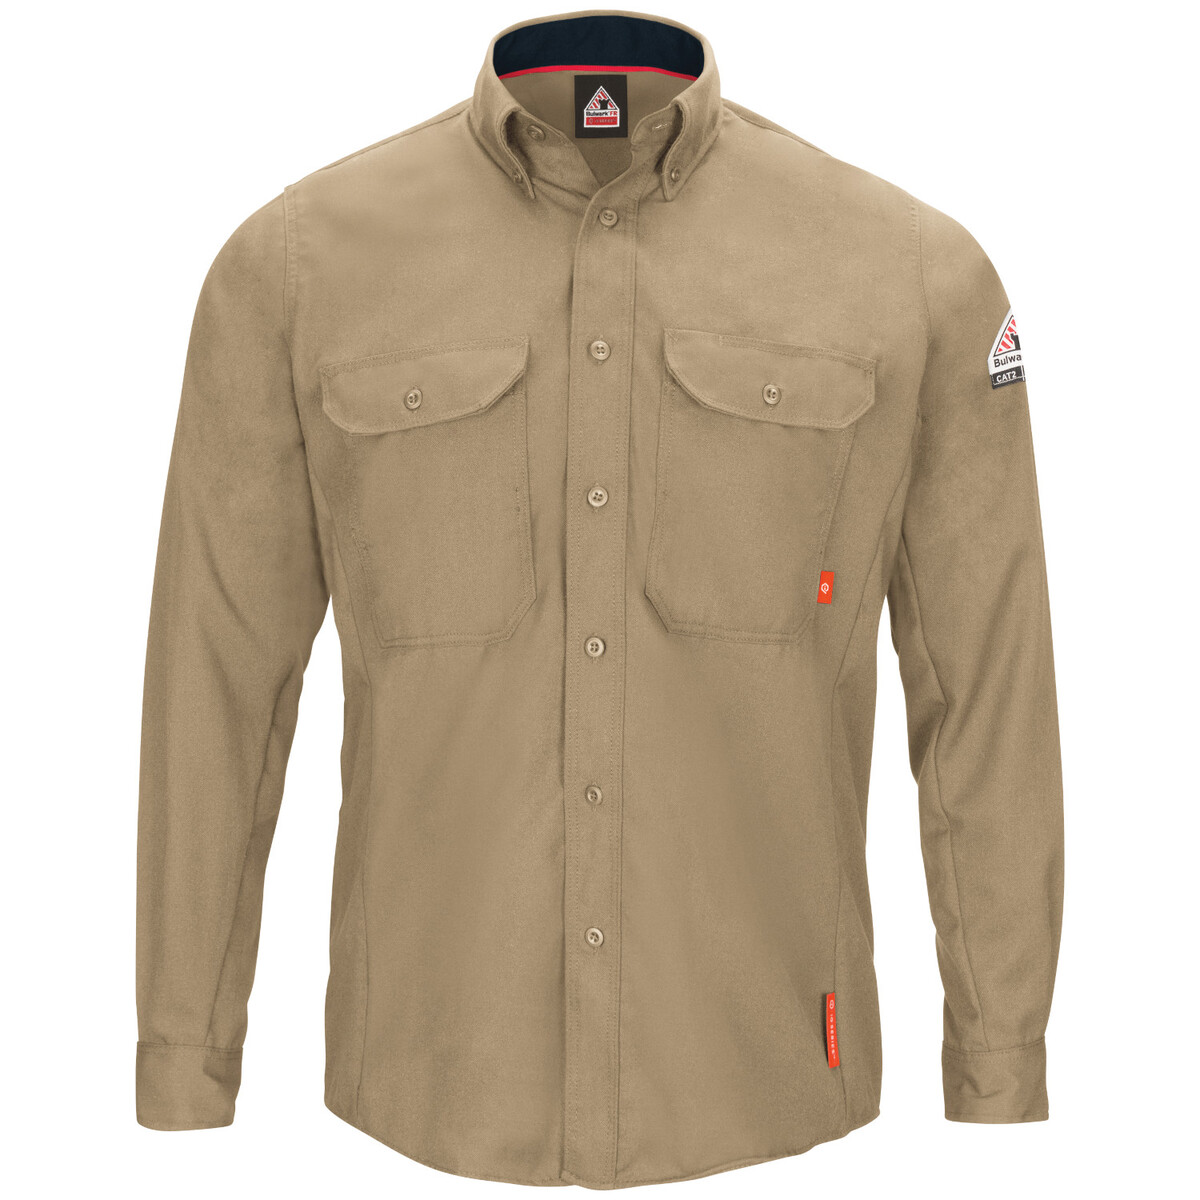 Bulwark® 2X Regular Khaki TenCate Evolv™ IQ Series® Long Sleeve Lightweight Flame Resistant Shirt With Button Front Closure And